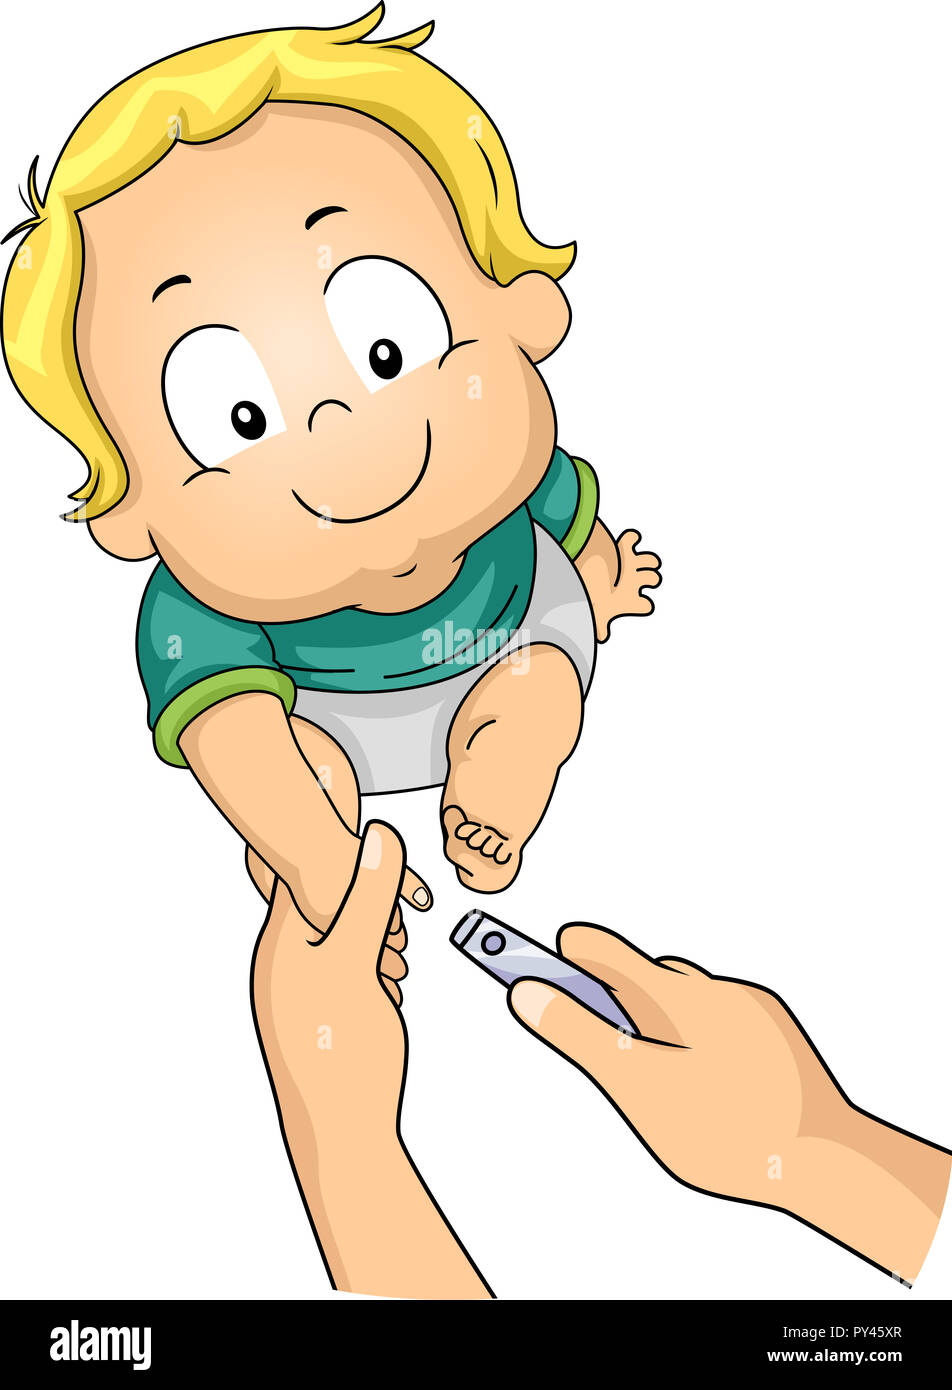 Illustration of Adult Hands Holding a Nail Clipper Clipping Nails of a Kid  Boy Stock Photo - Alamy